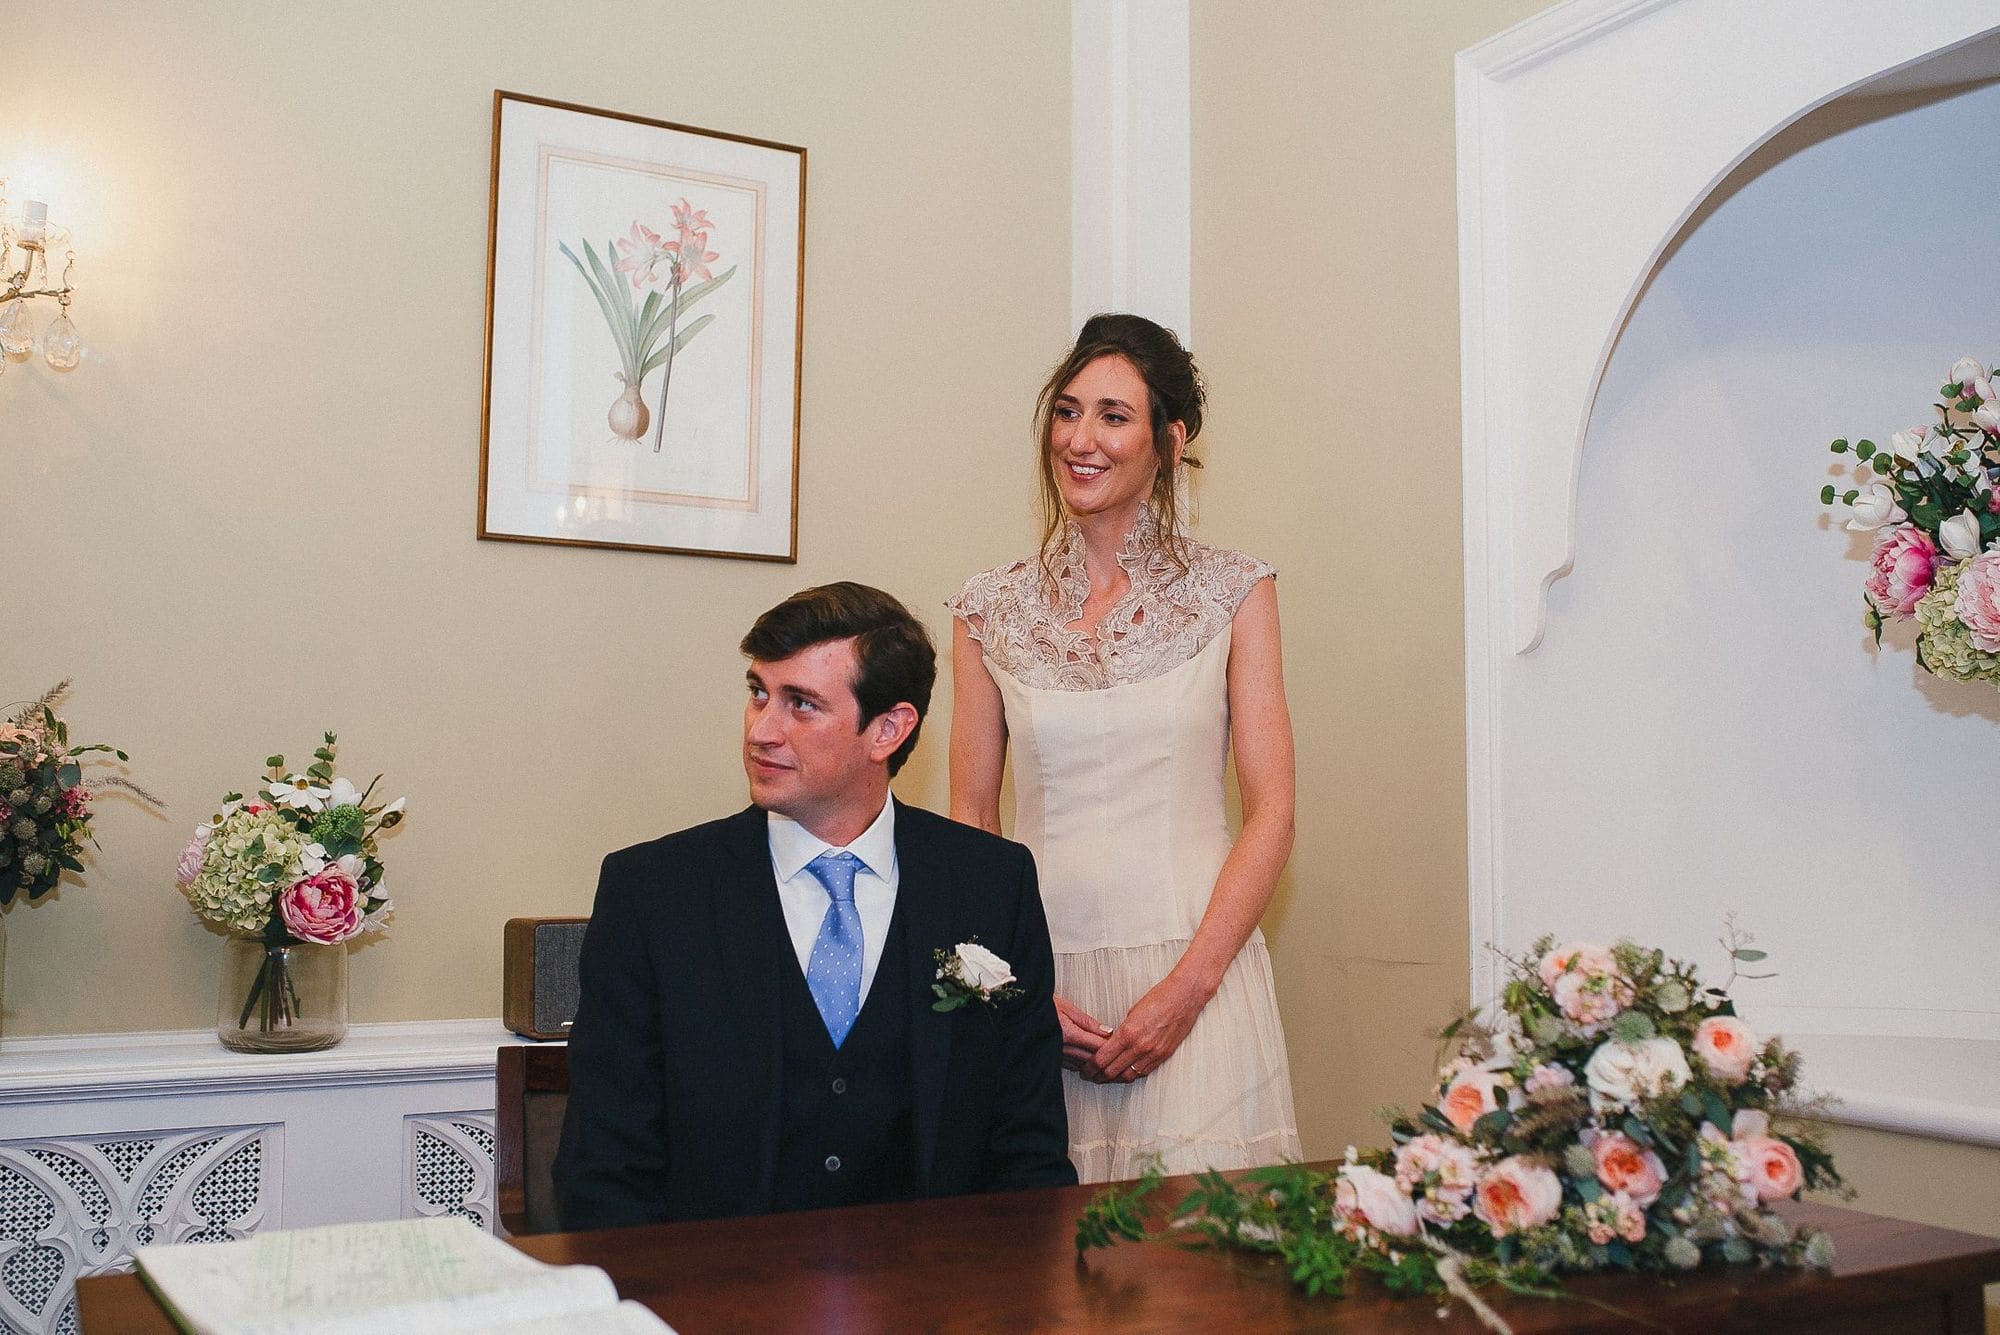 The best London register offices for your ceremony - Chelsea Old Town Hall